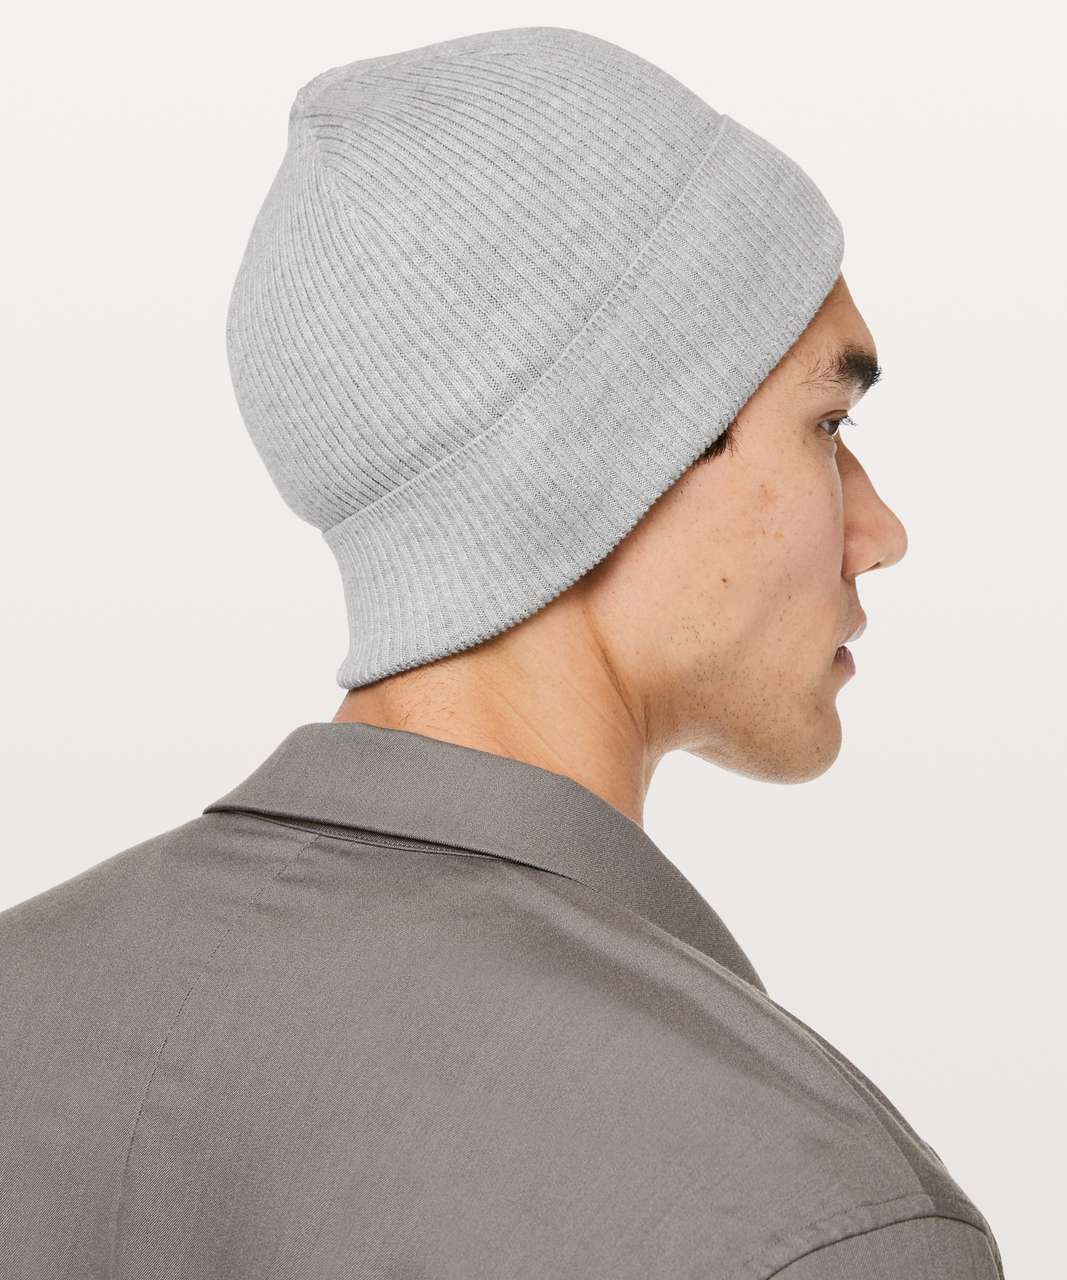 Lululemon All For It Beanie - Heathered Core Light Grey